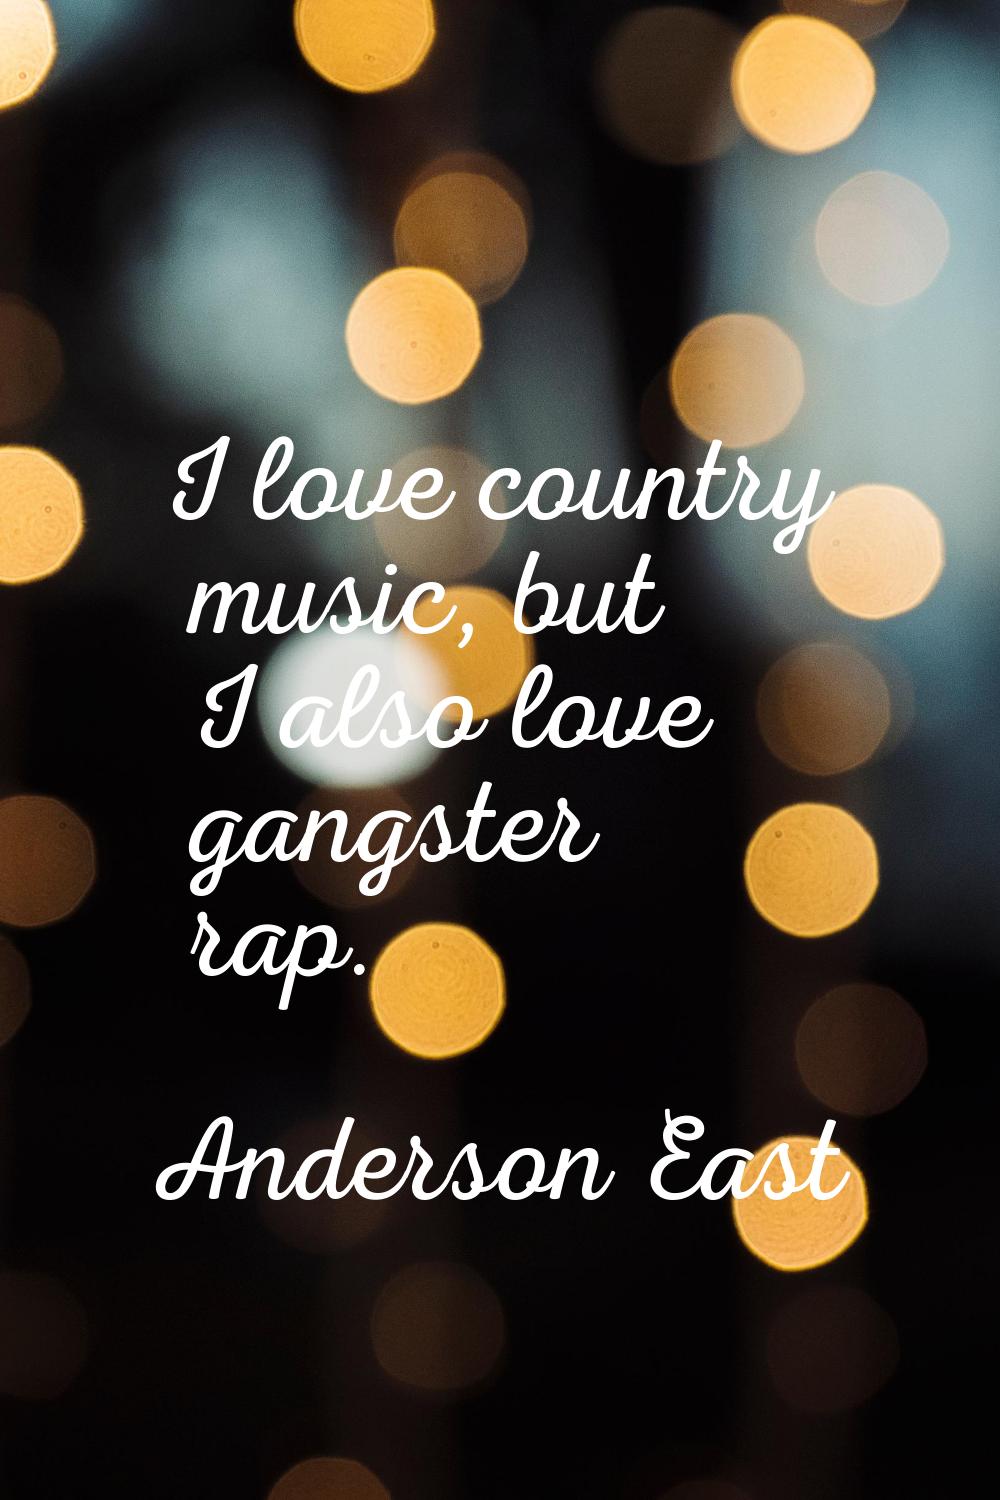 I love country music, but I also love gangster rap.